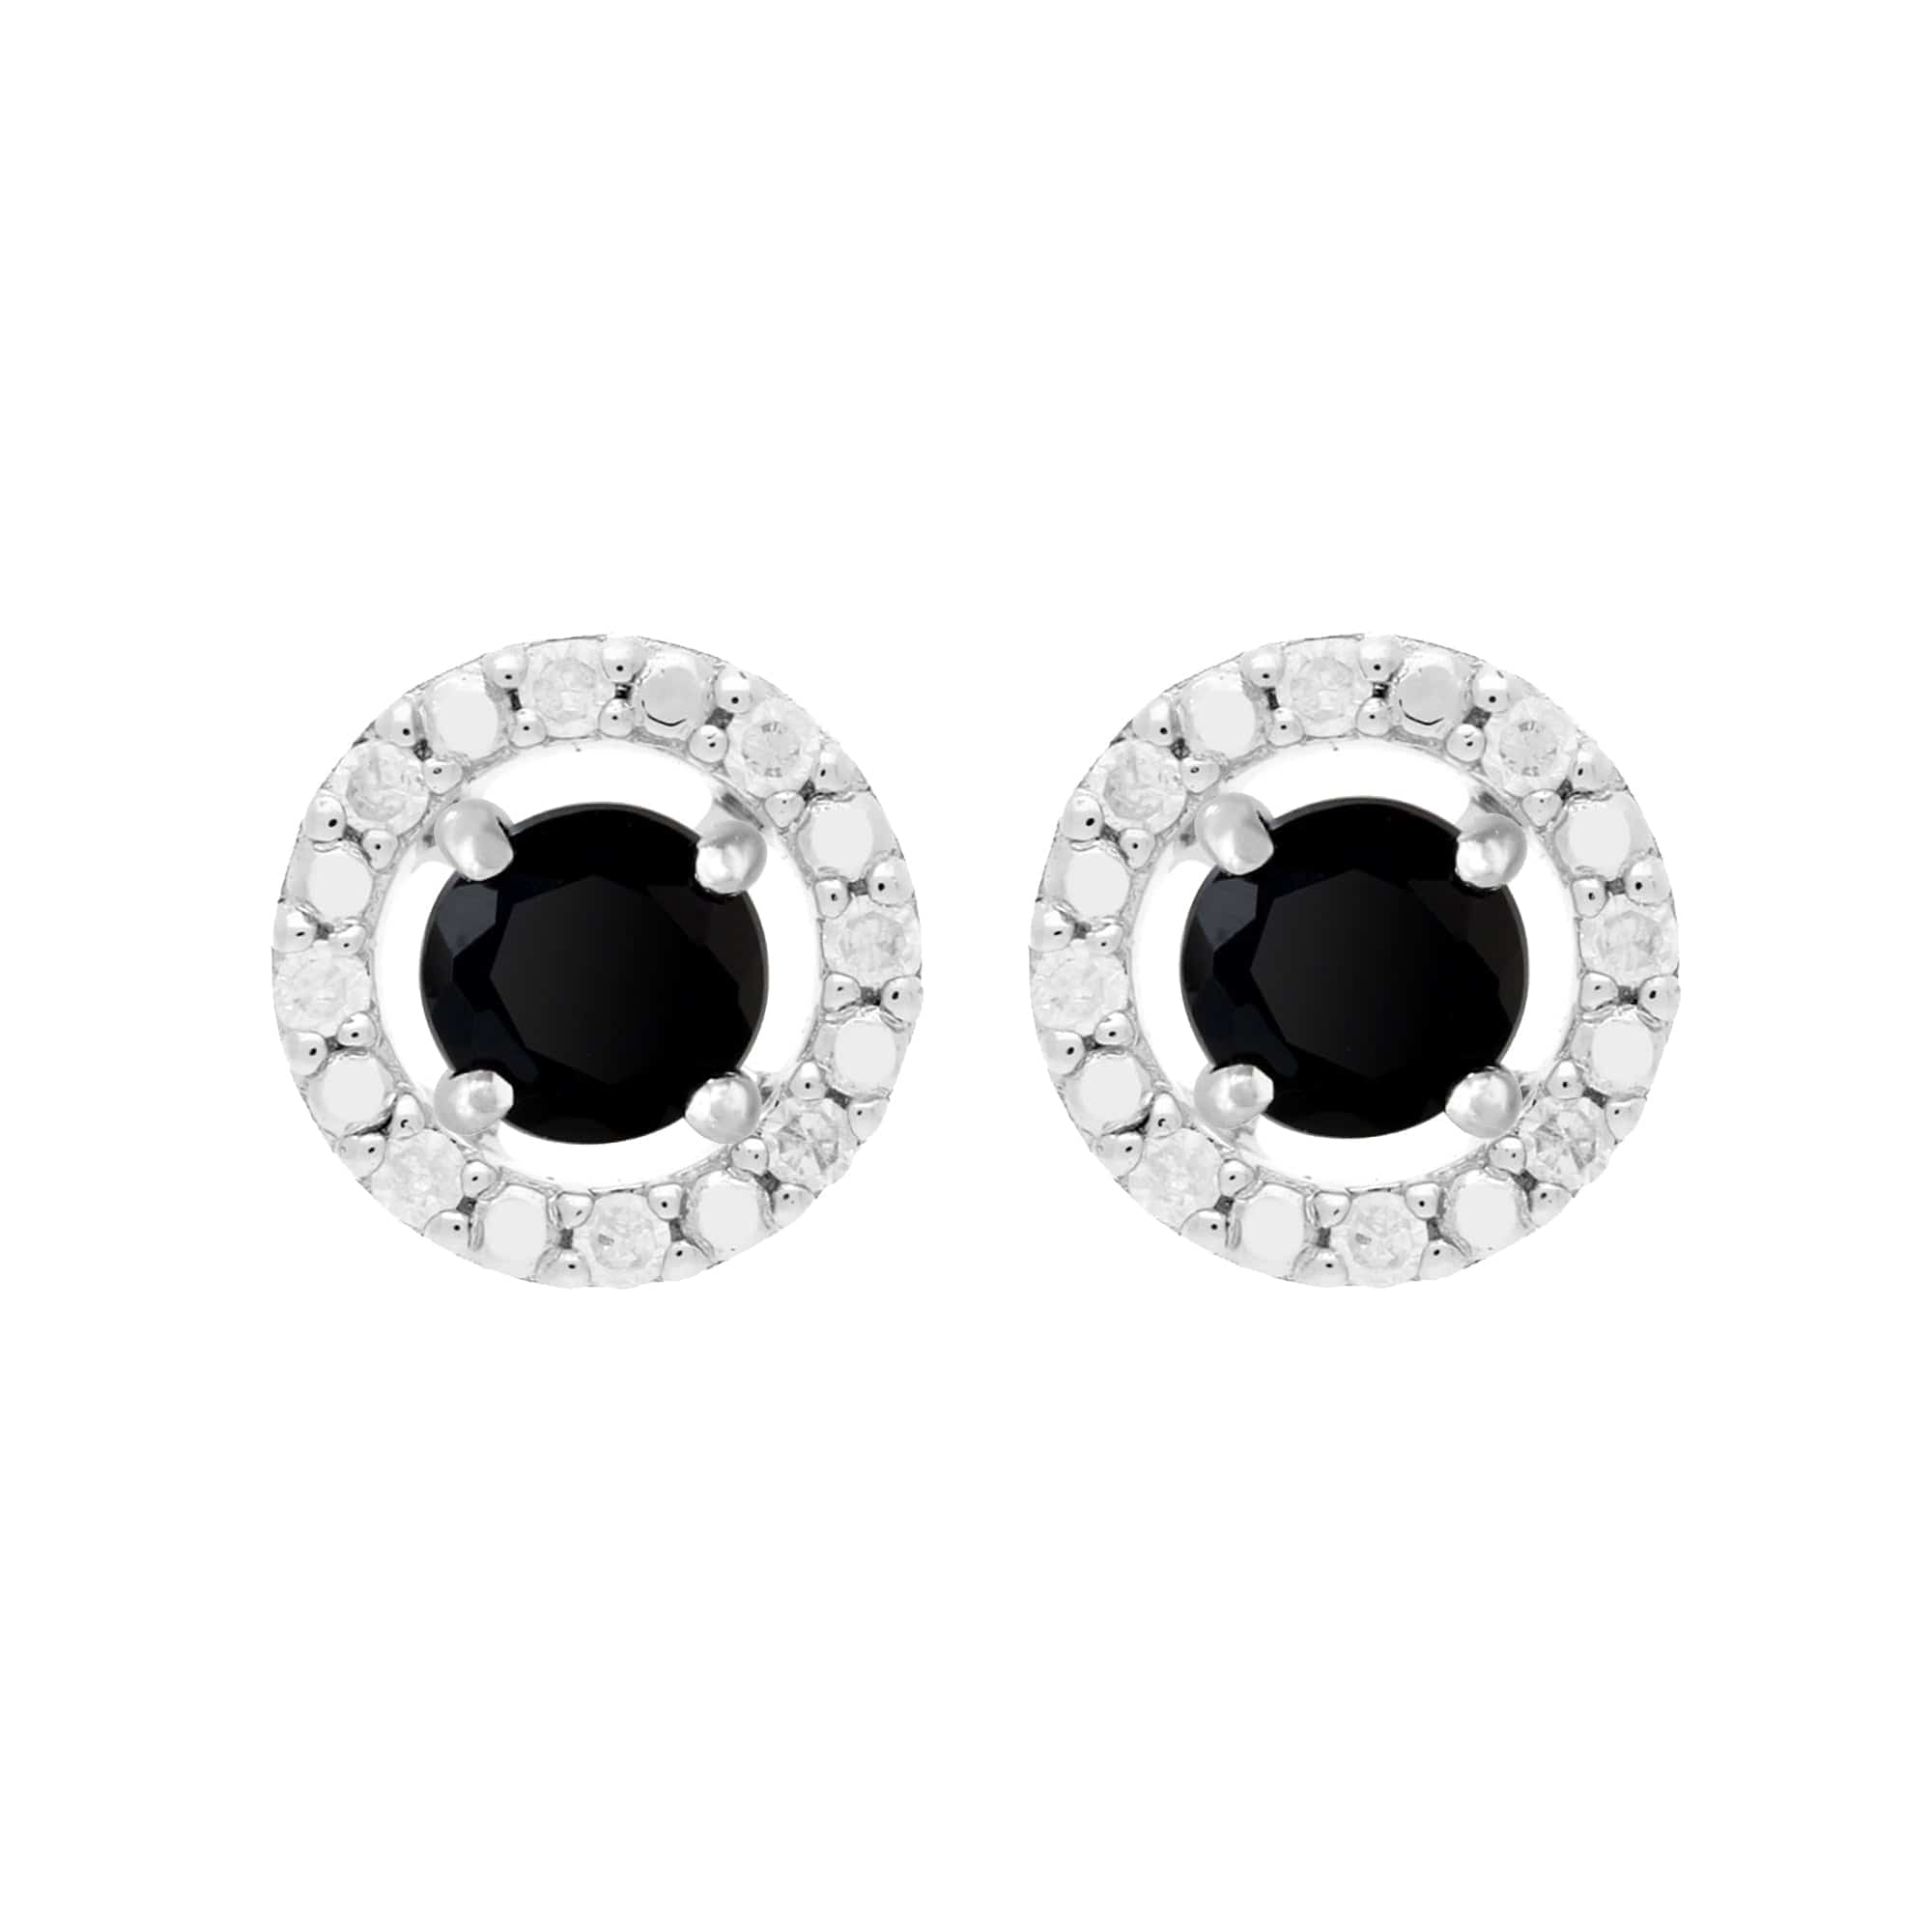 117E0031119-162E0228019 Classic Round Black Onyx Stud Earrings and Detachable Diamond Round Ear Jacket in 9ct White Gold 1